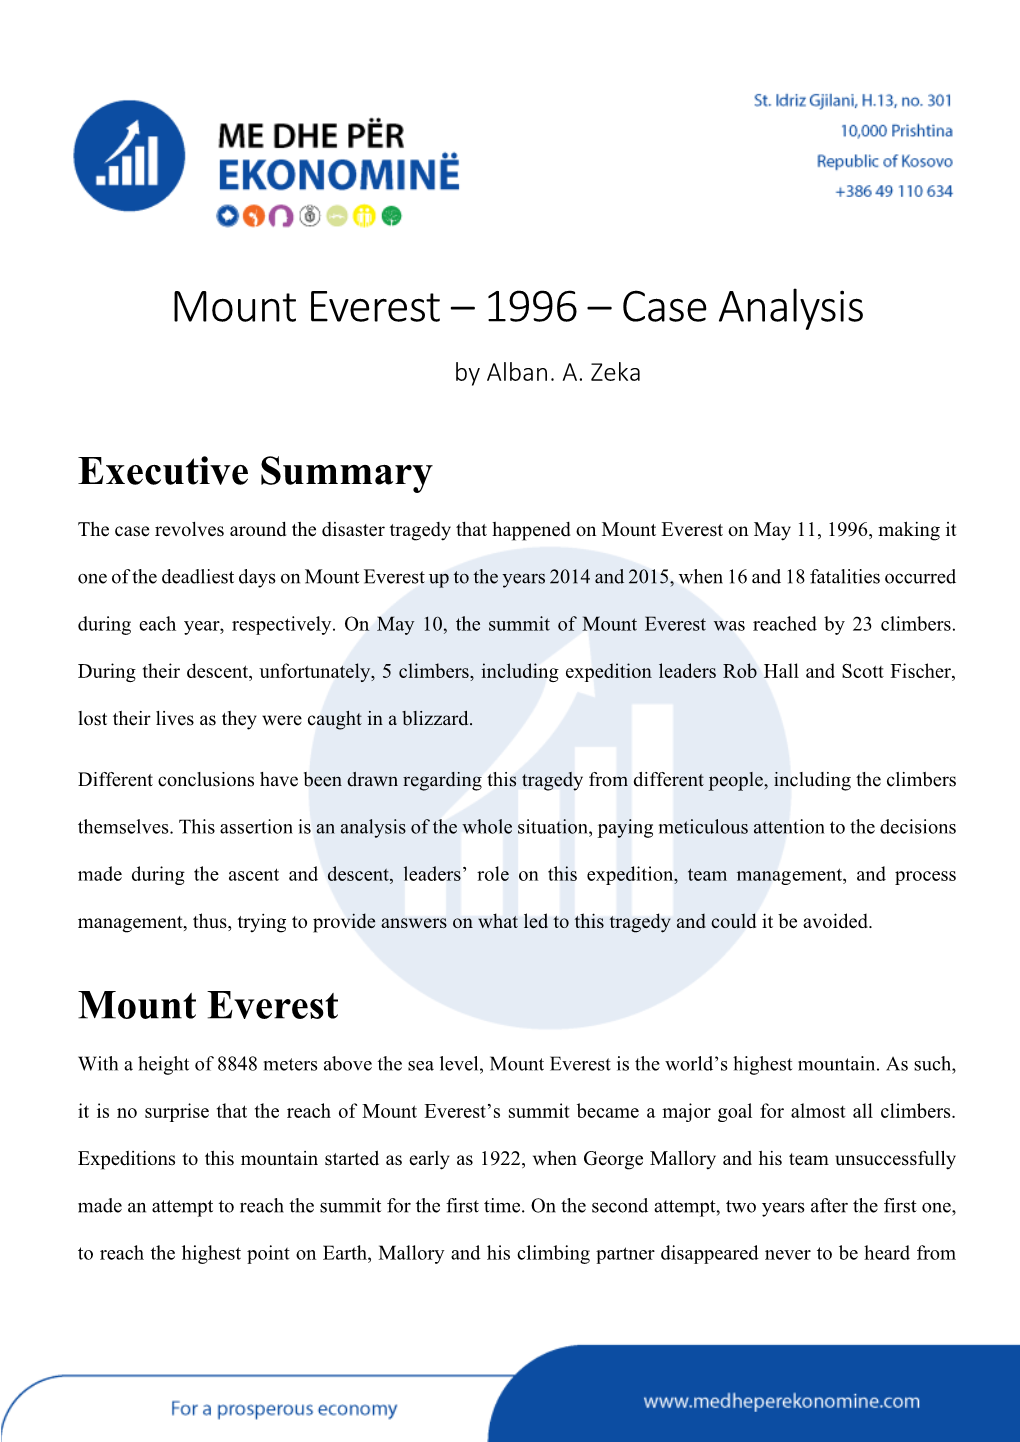 Mount Everest – 1996 – Case Analysis by Alban